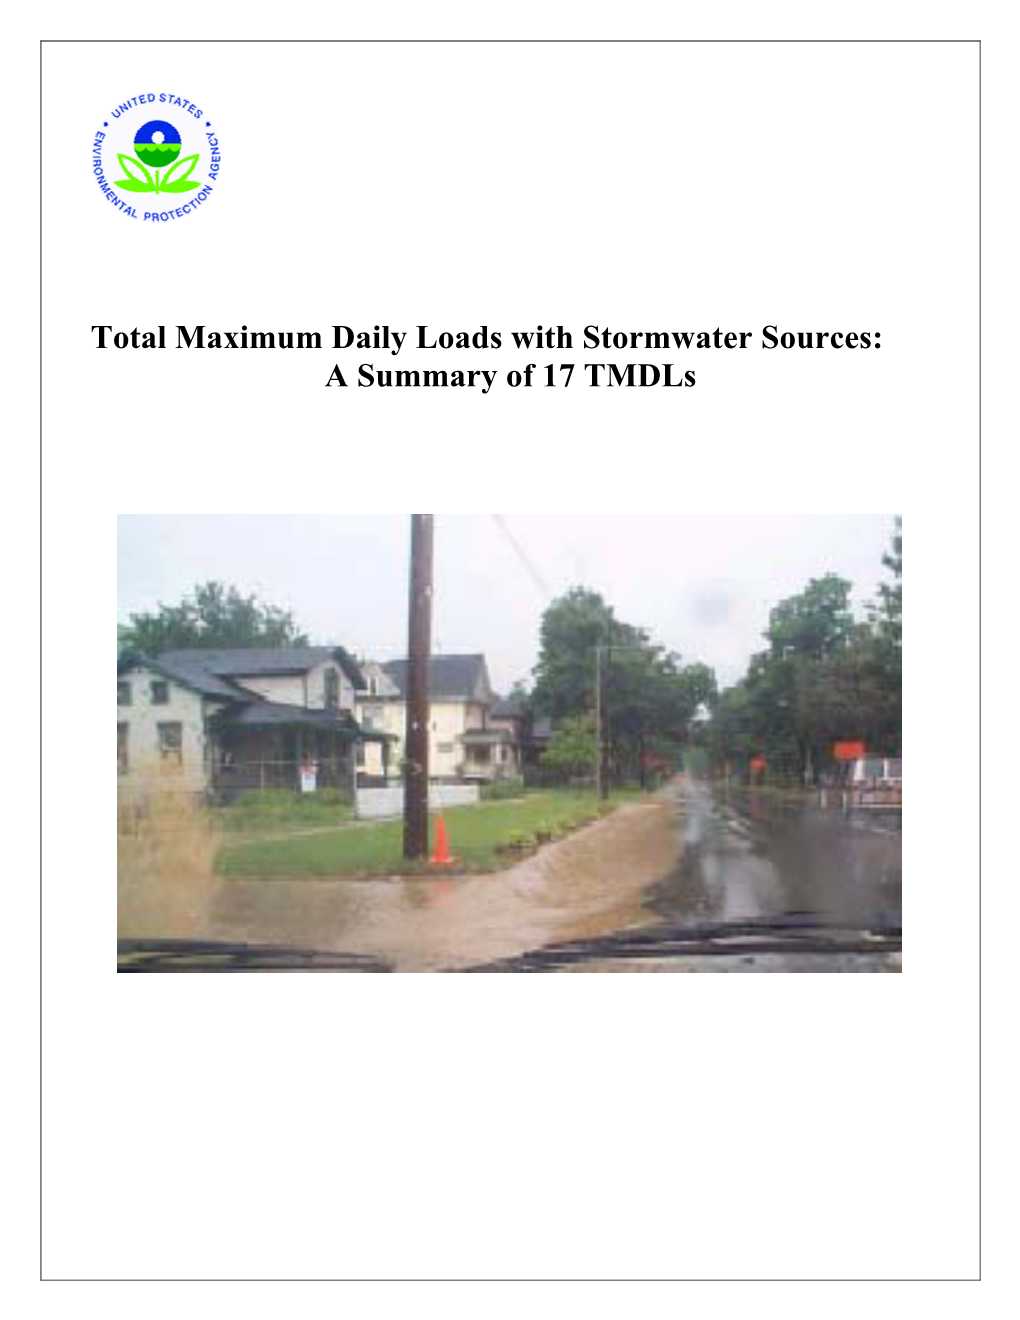 Total Maximum Daily Loads with Stormwater Sources: a Summary of 17 Tmdls